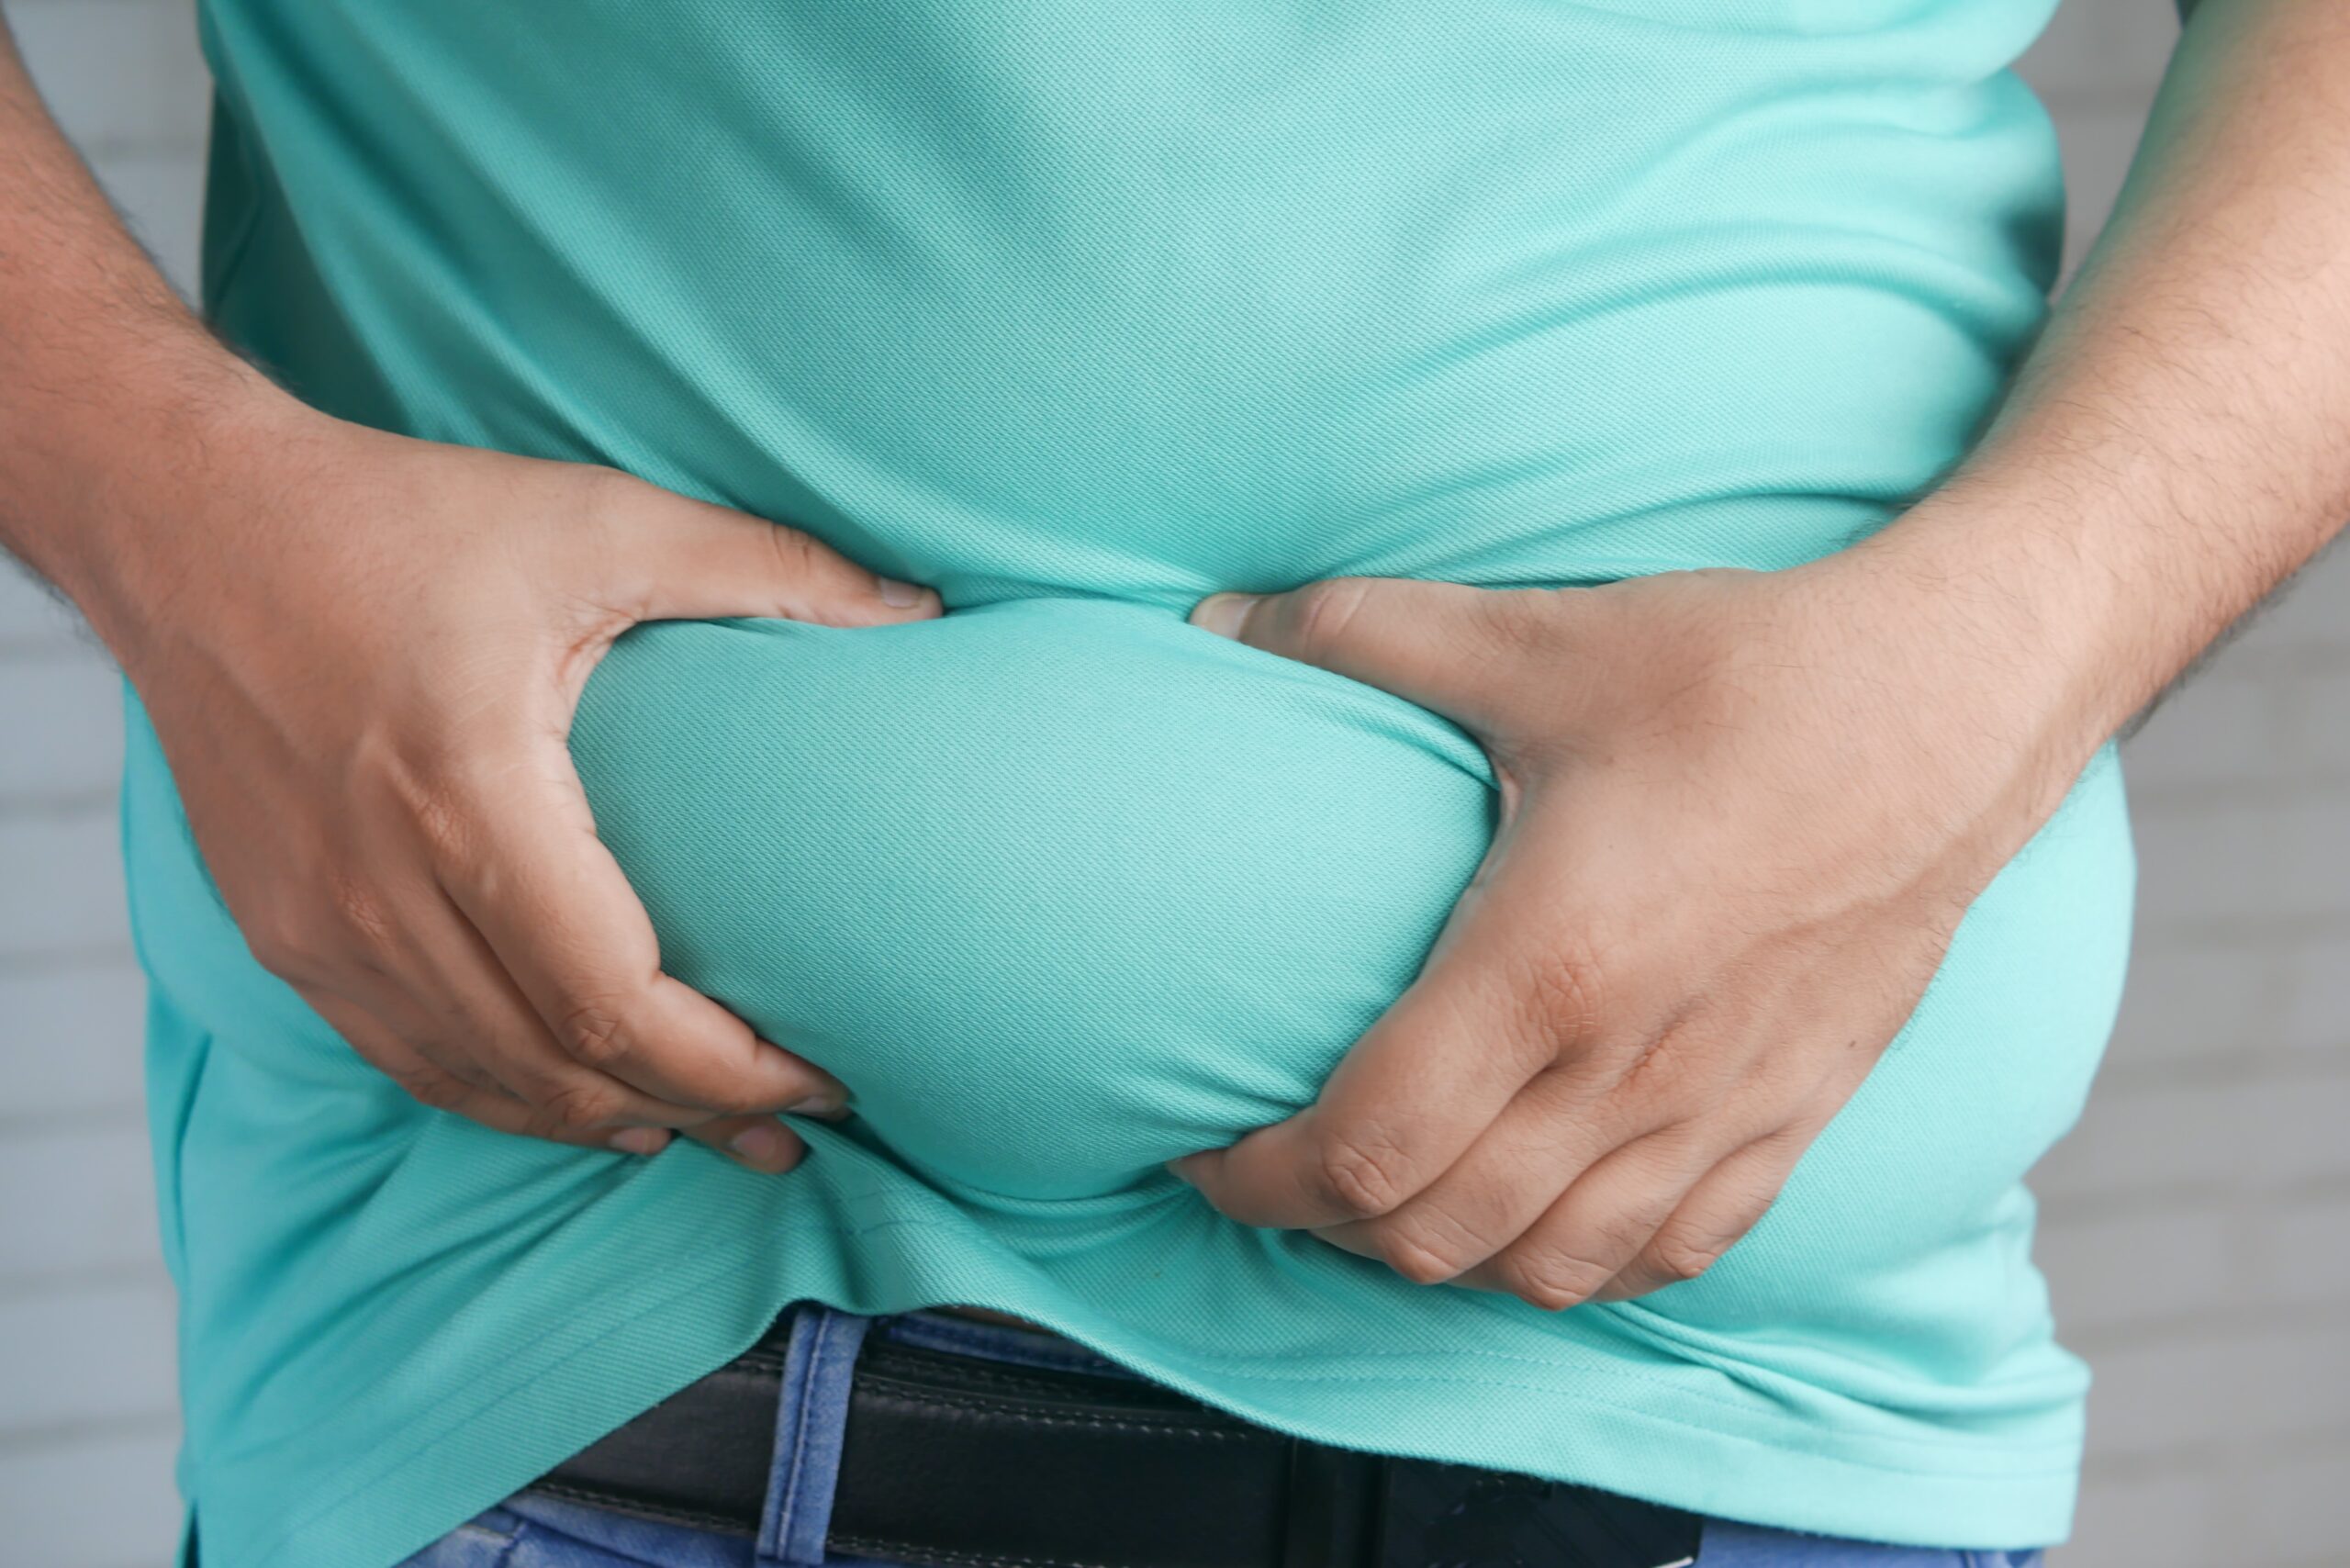 Ascites: What Is, Causes, Risk Factors, Treatment, and Prevention